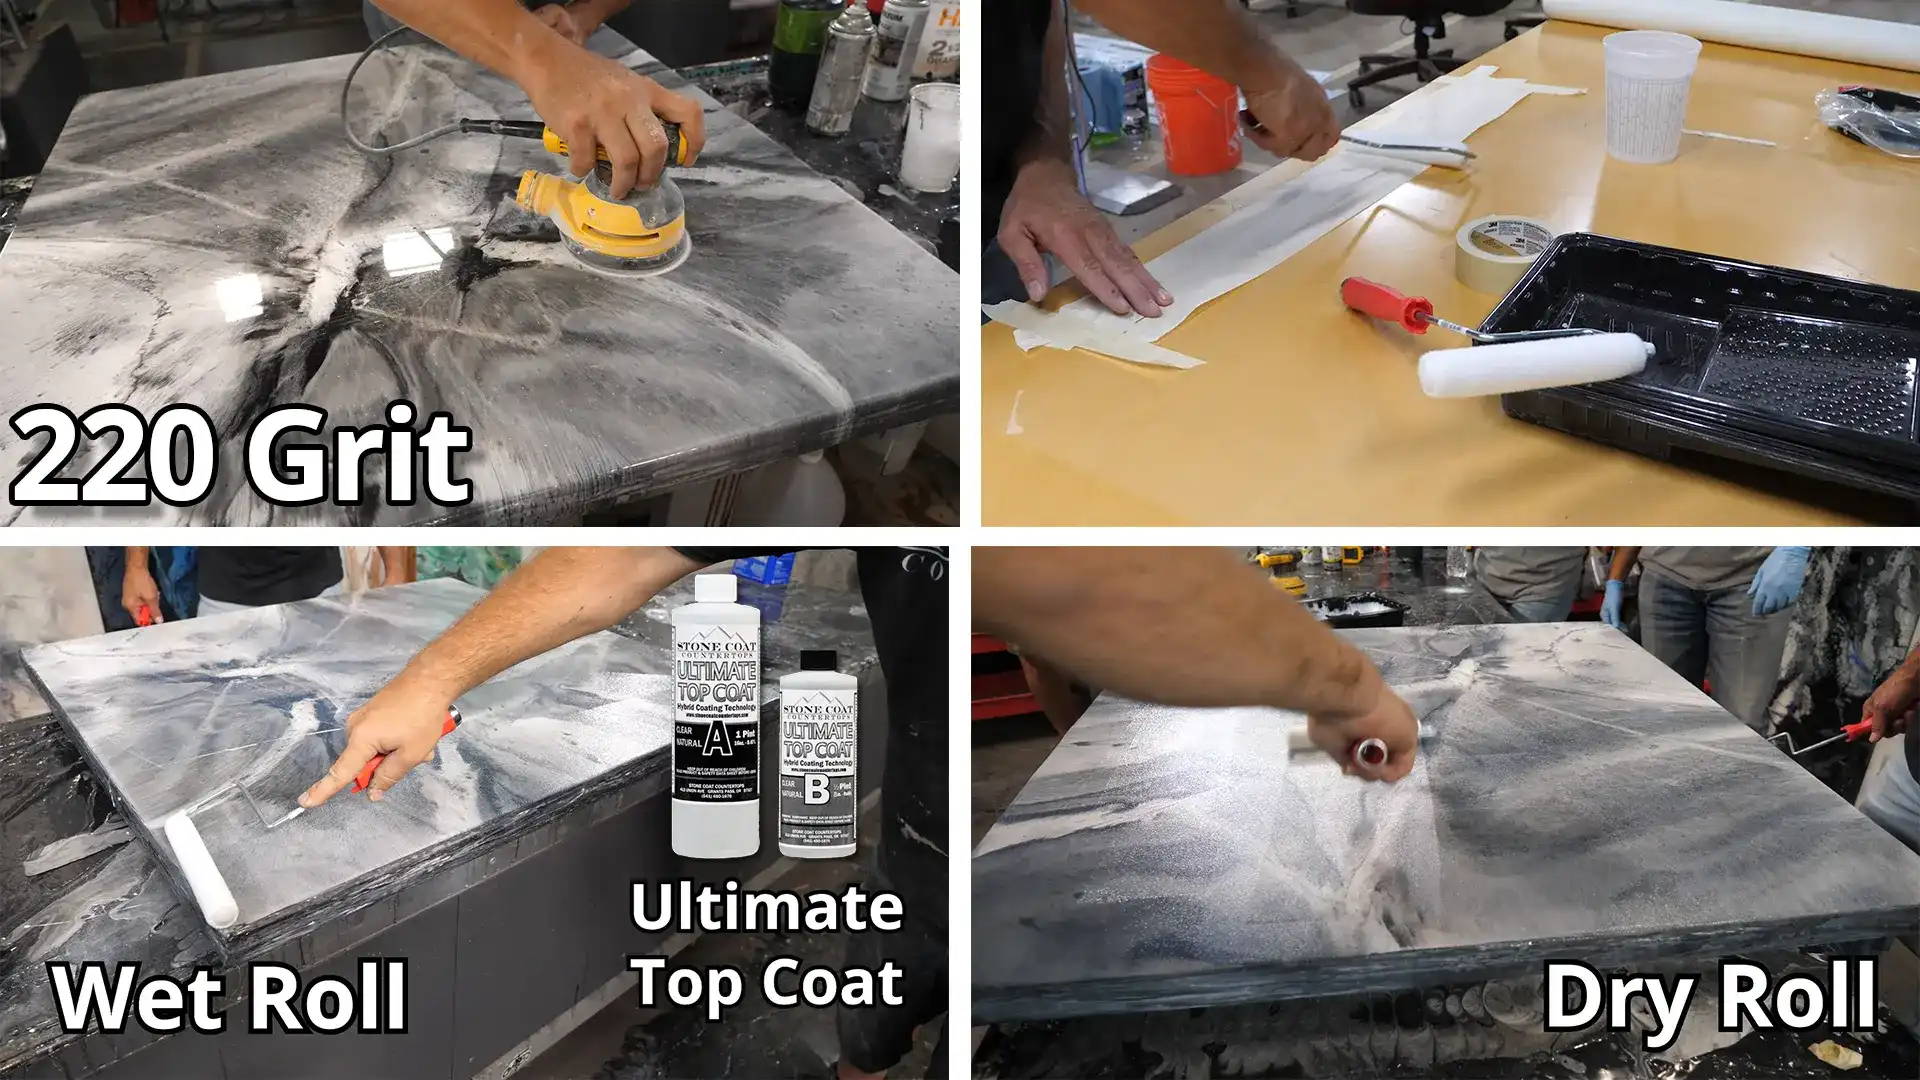 Step #9: Sand, apply Ultimate Top Coat. Remove drips, lightly sand, mix Ultimate Top Coat, apply with wet roller, even out with dry roller. 